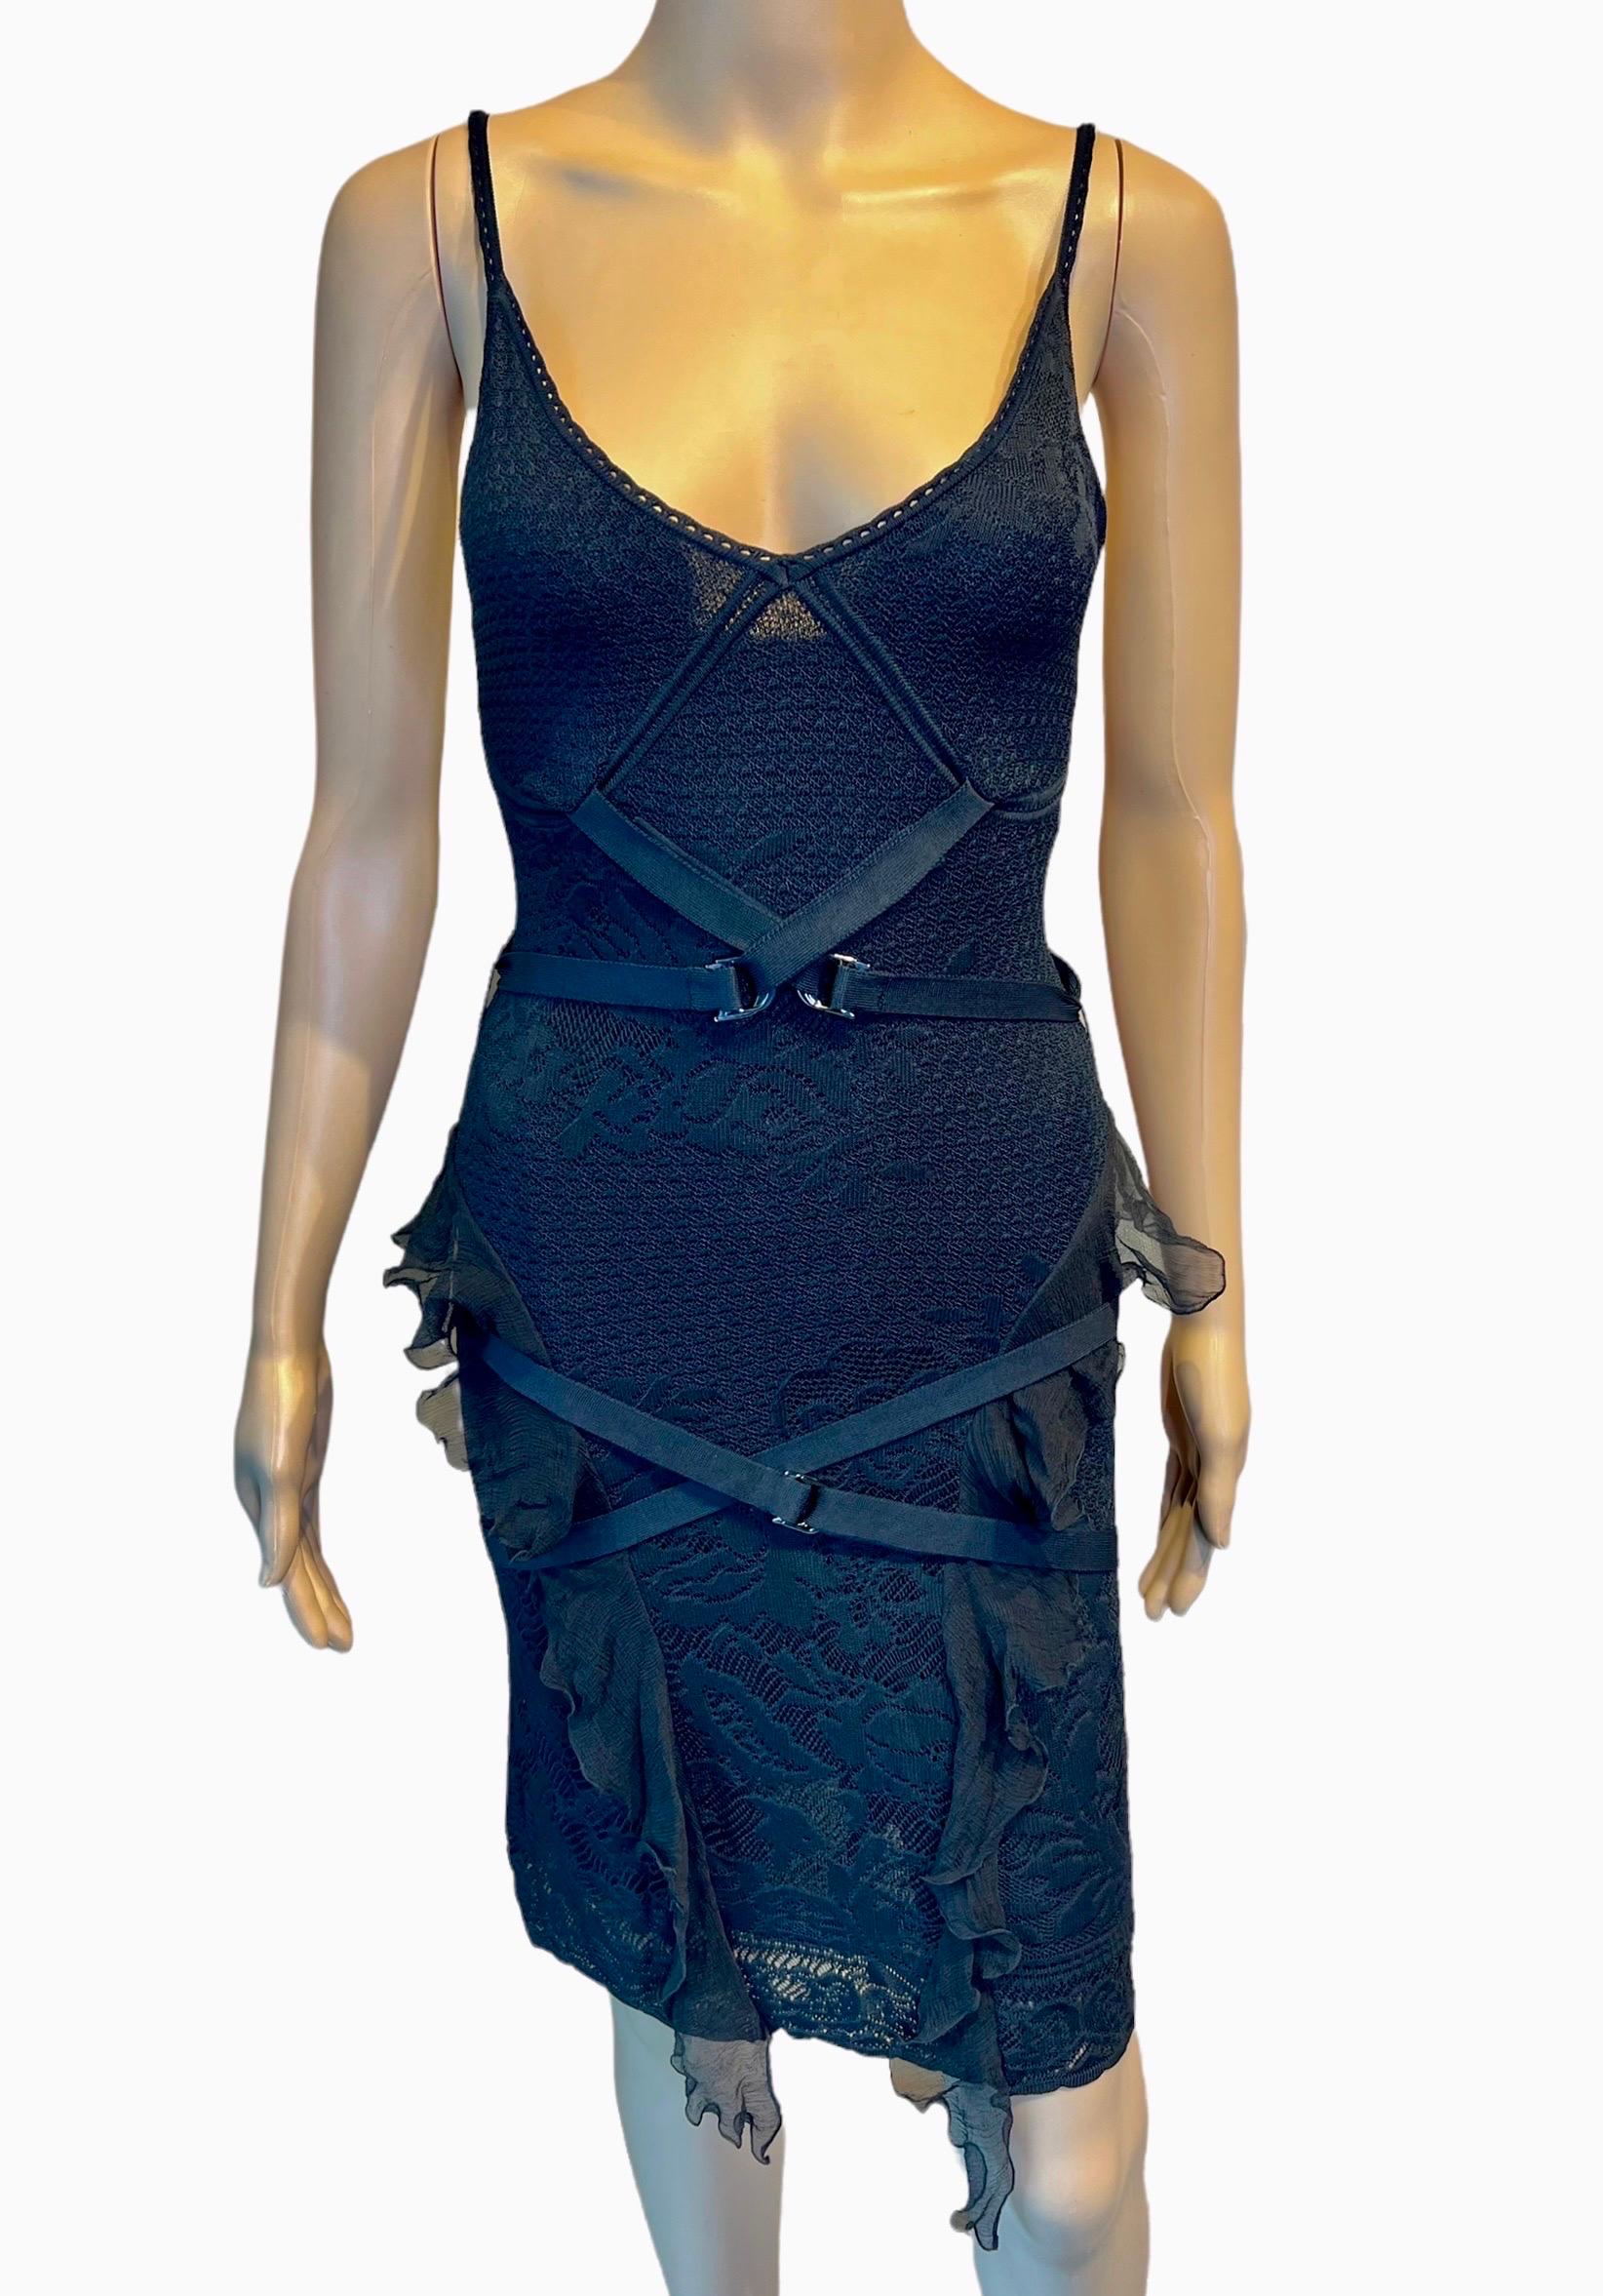 Christian Dior by John Galliano S/S 2003 Ruffled Belted Sheer Lace Bondage Open Knit Black Dress FR 38


